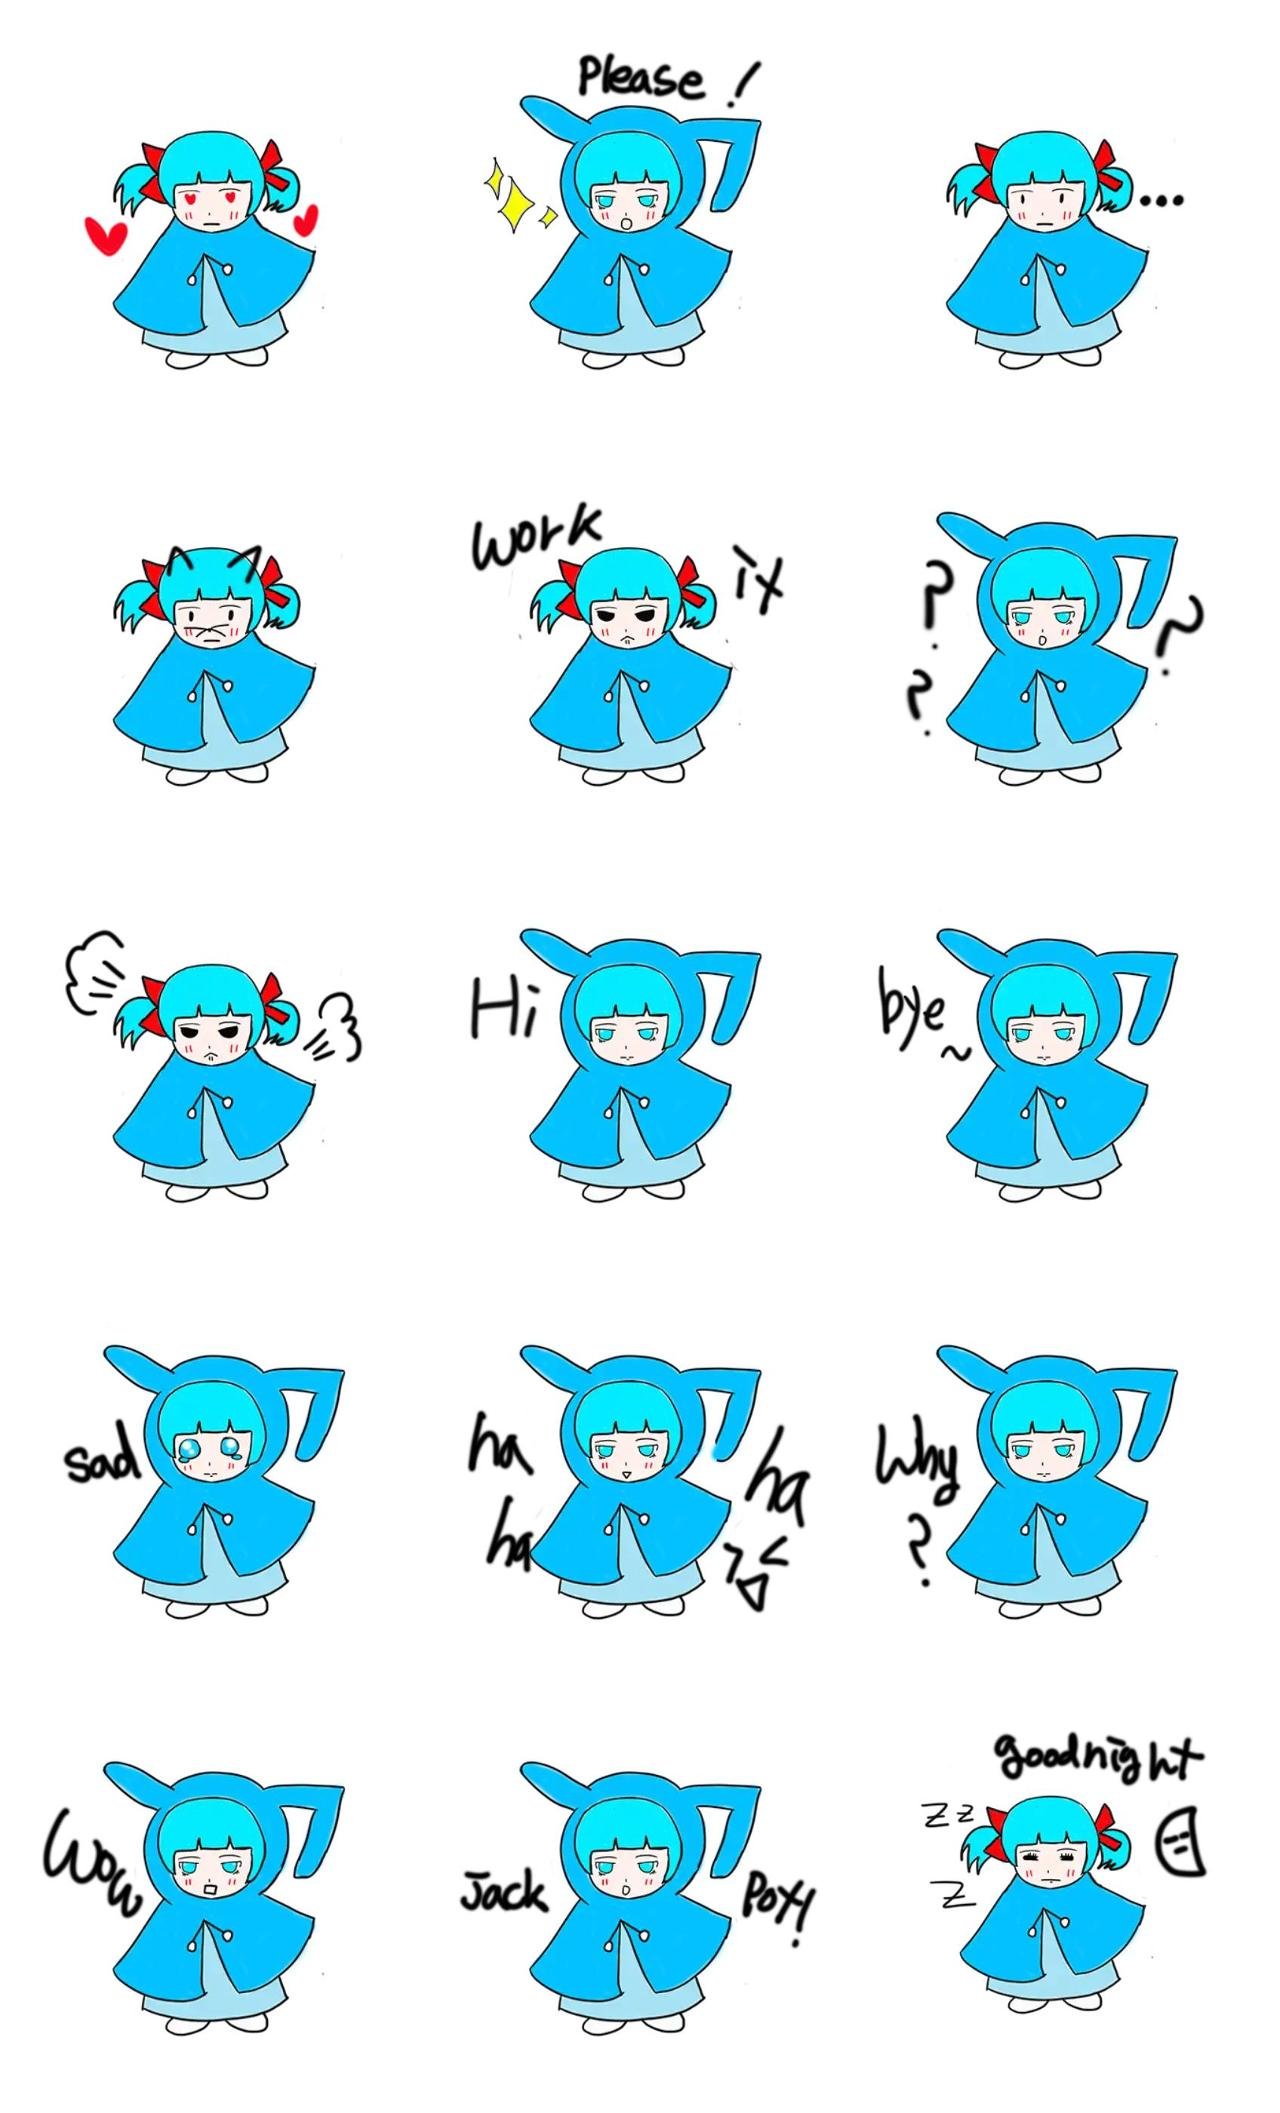 Blue Rabbit Animals,People sticker pack for Whatsapp, Telegram, Signal, and others chatting and message apps